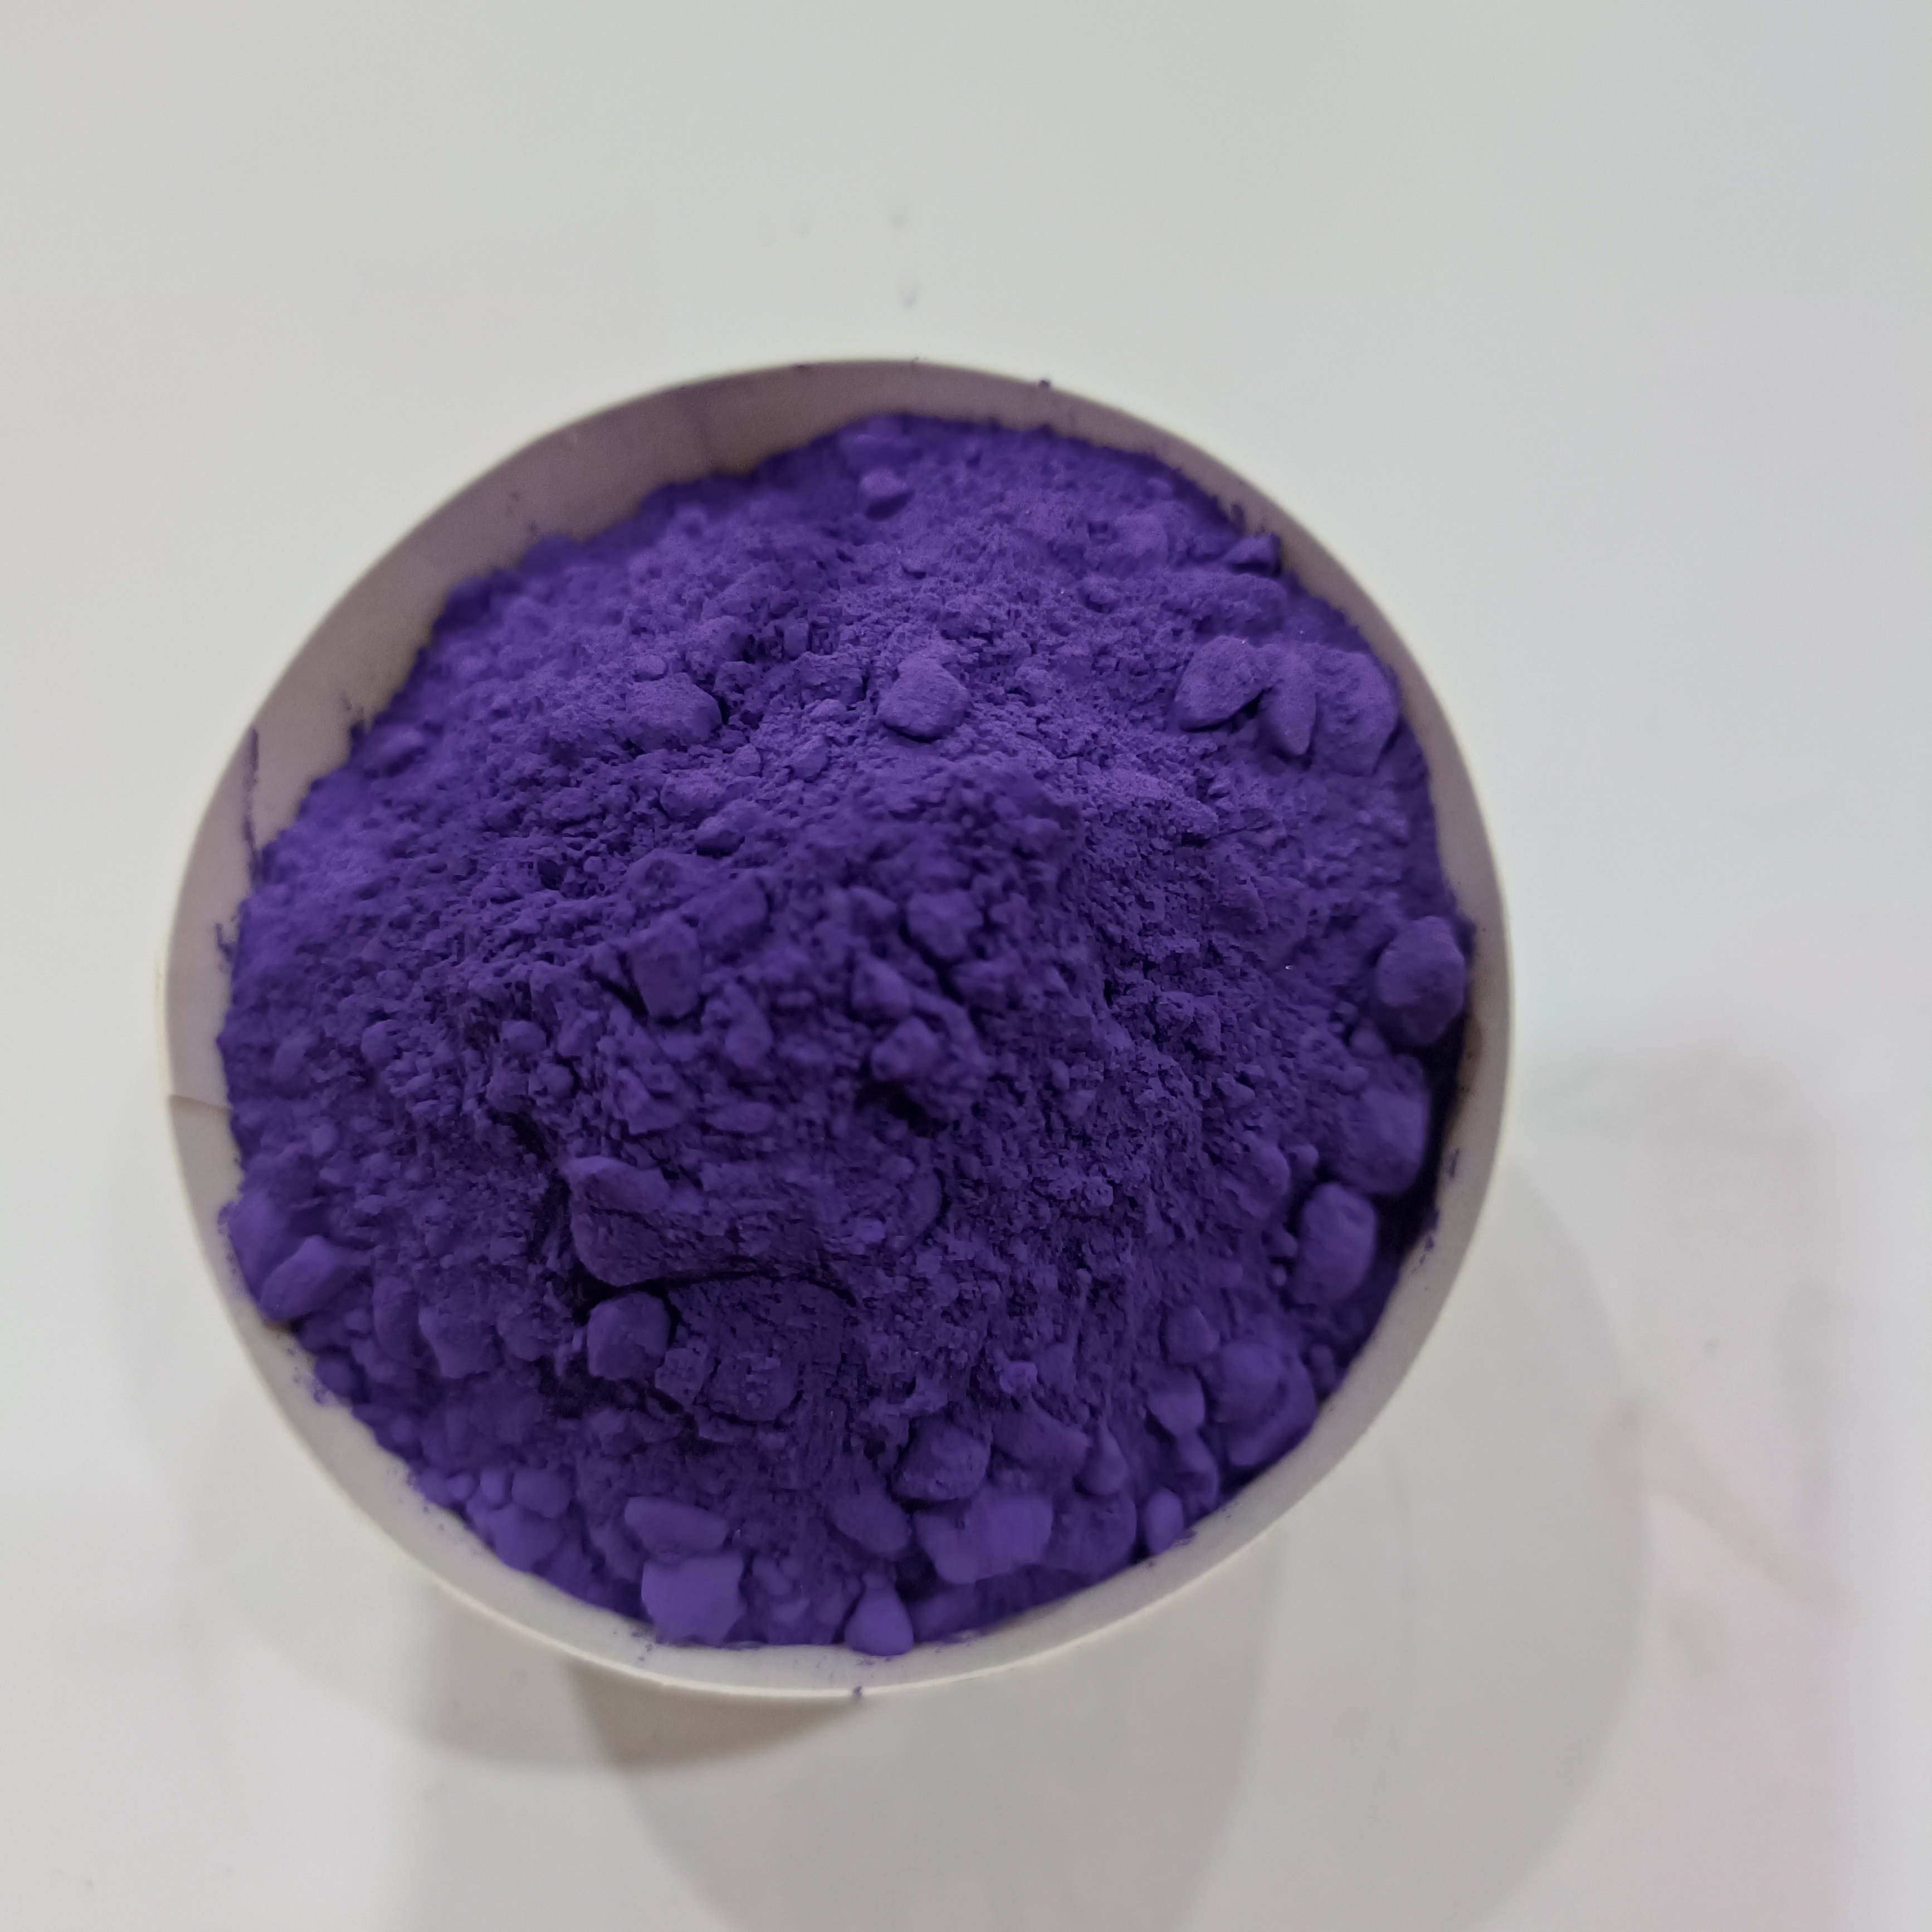 The iron oxide pigment market is expected to grow